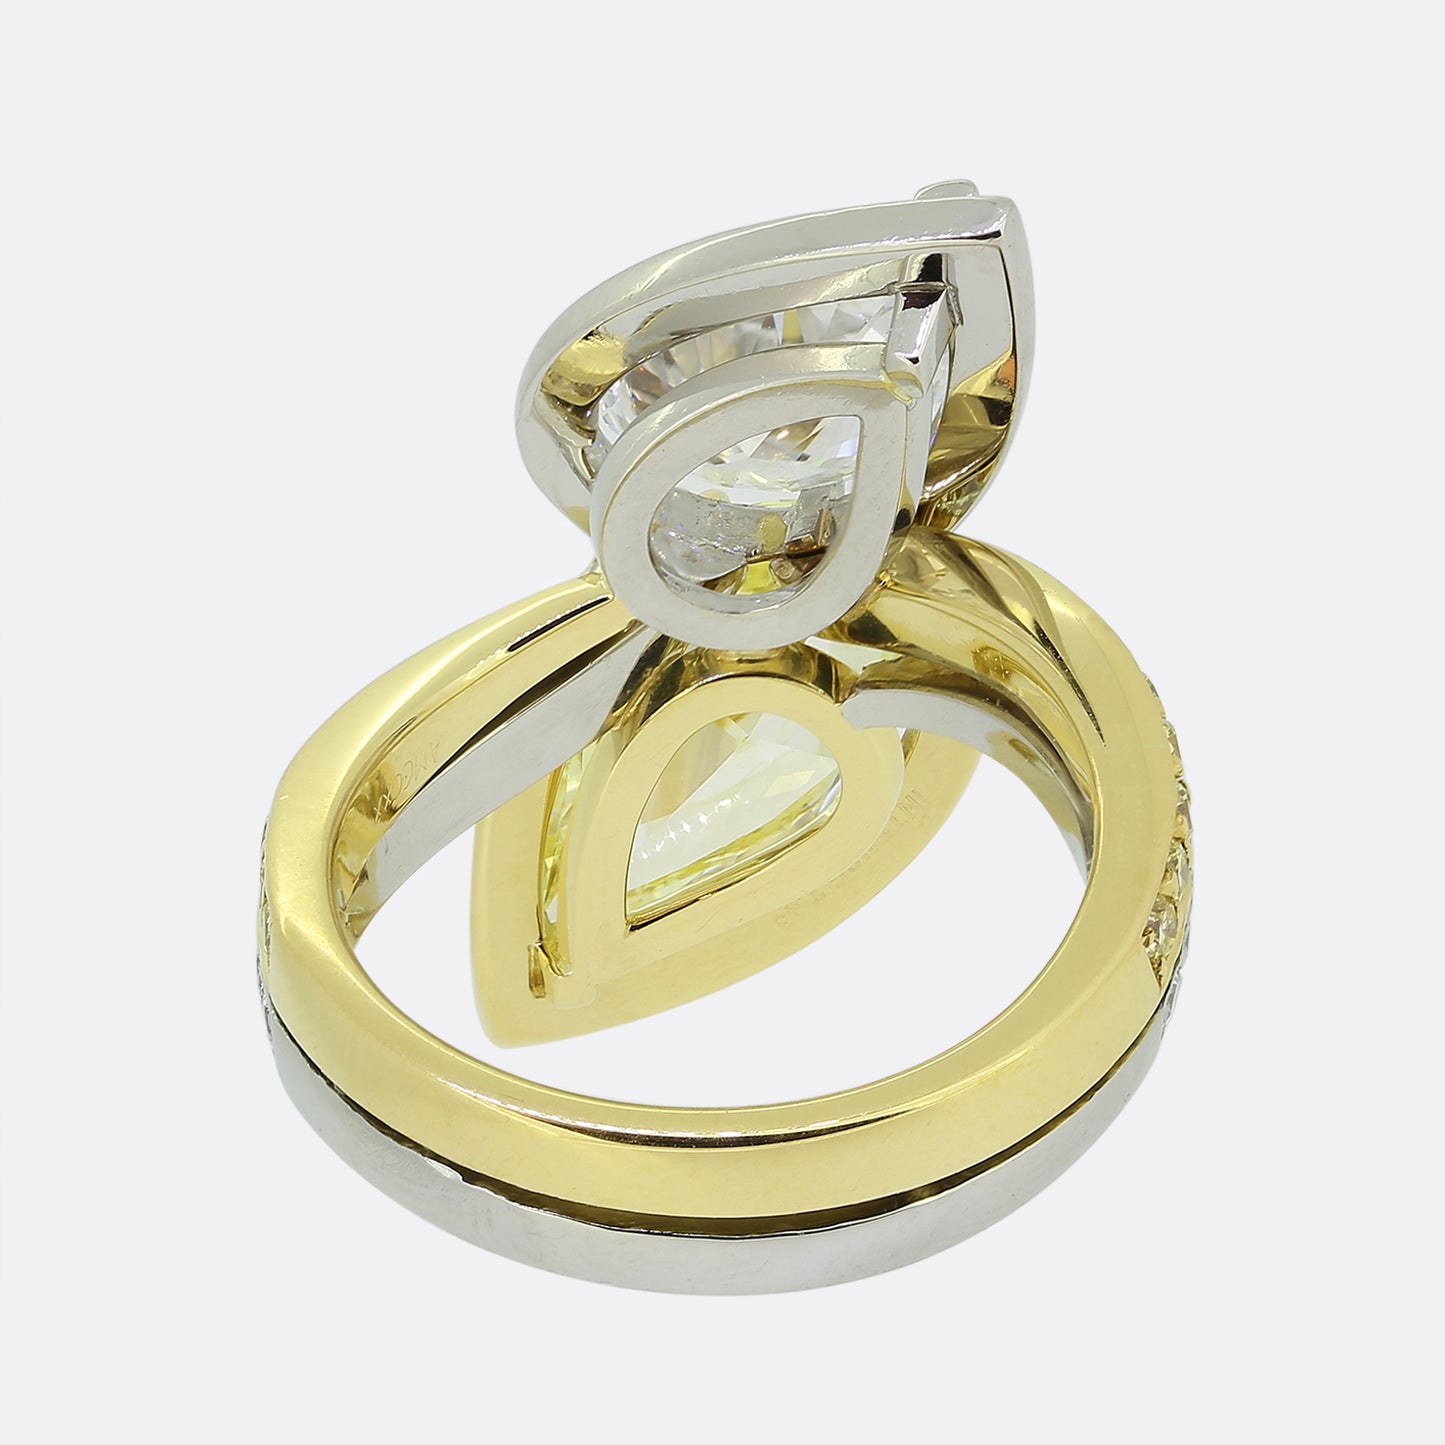 Boodles Fancy Intense Yellow Pear Cut Diamond Crossover Ring